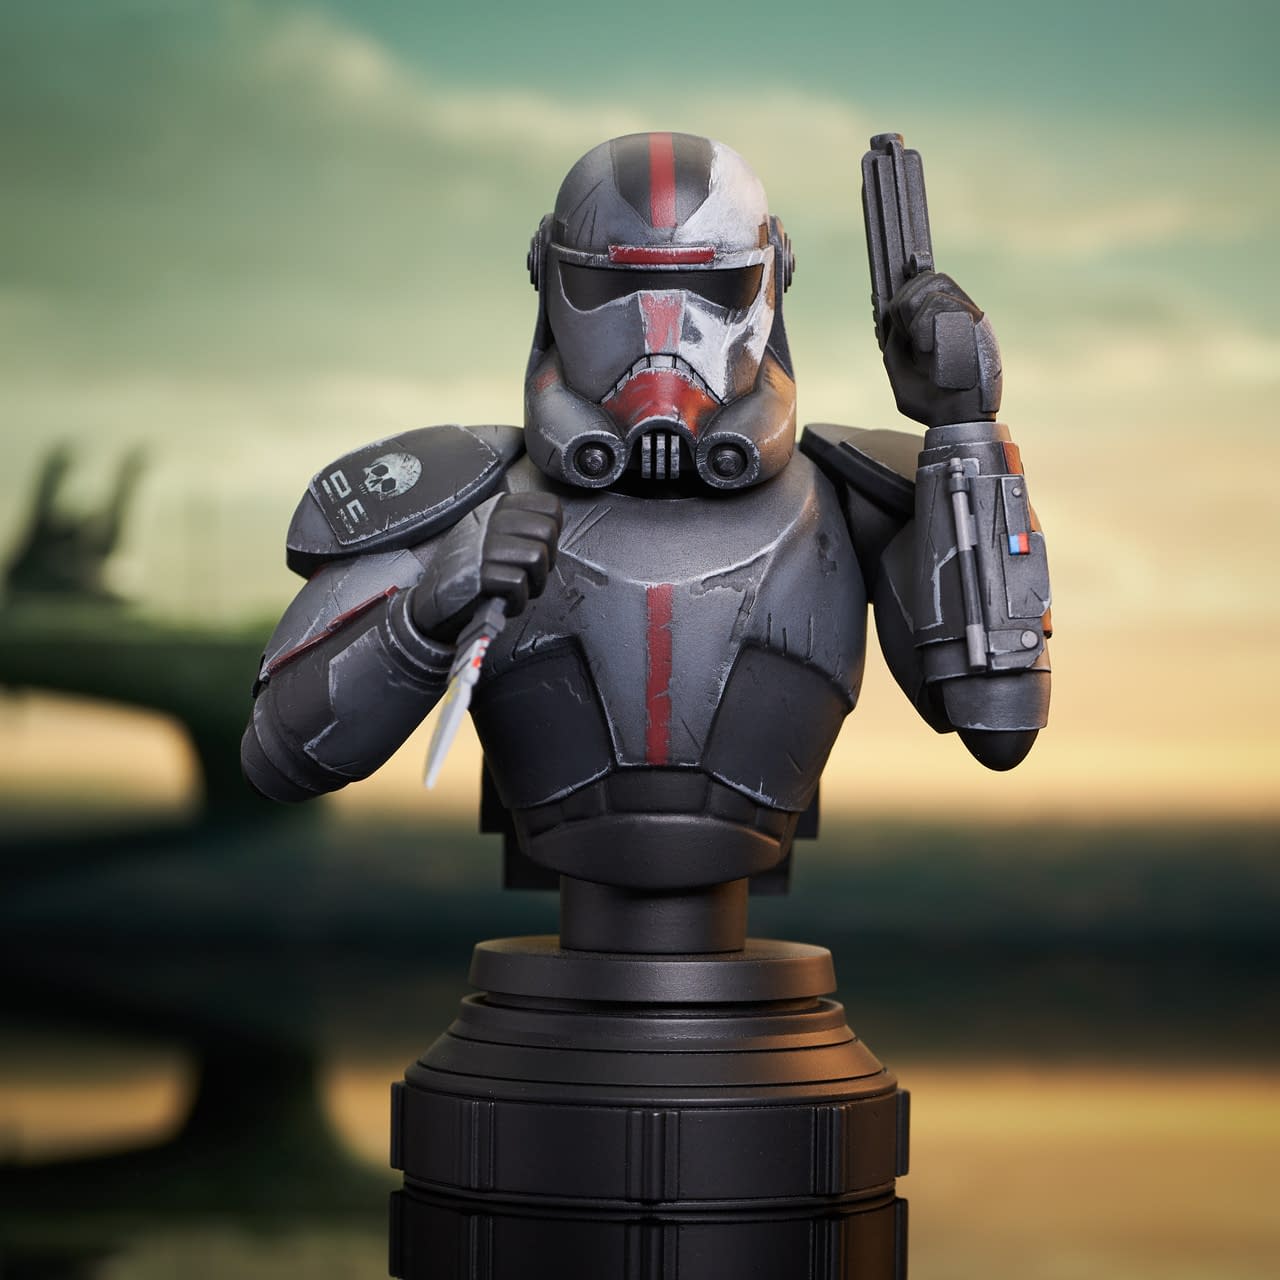 Bring Balance to the Force with New Star Wars Gentle Giant Reveals 